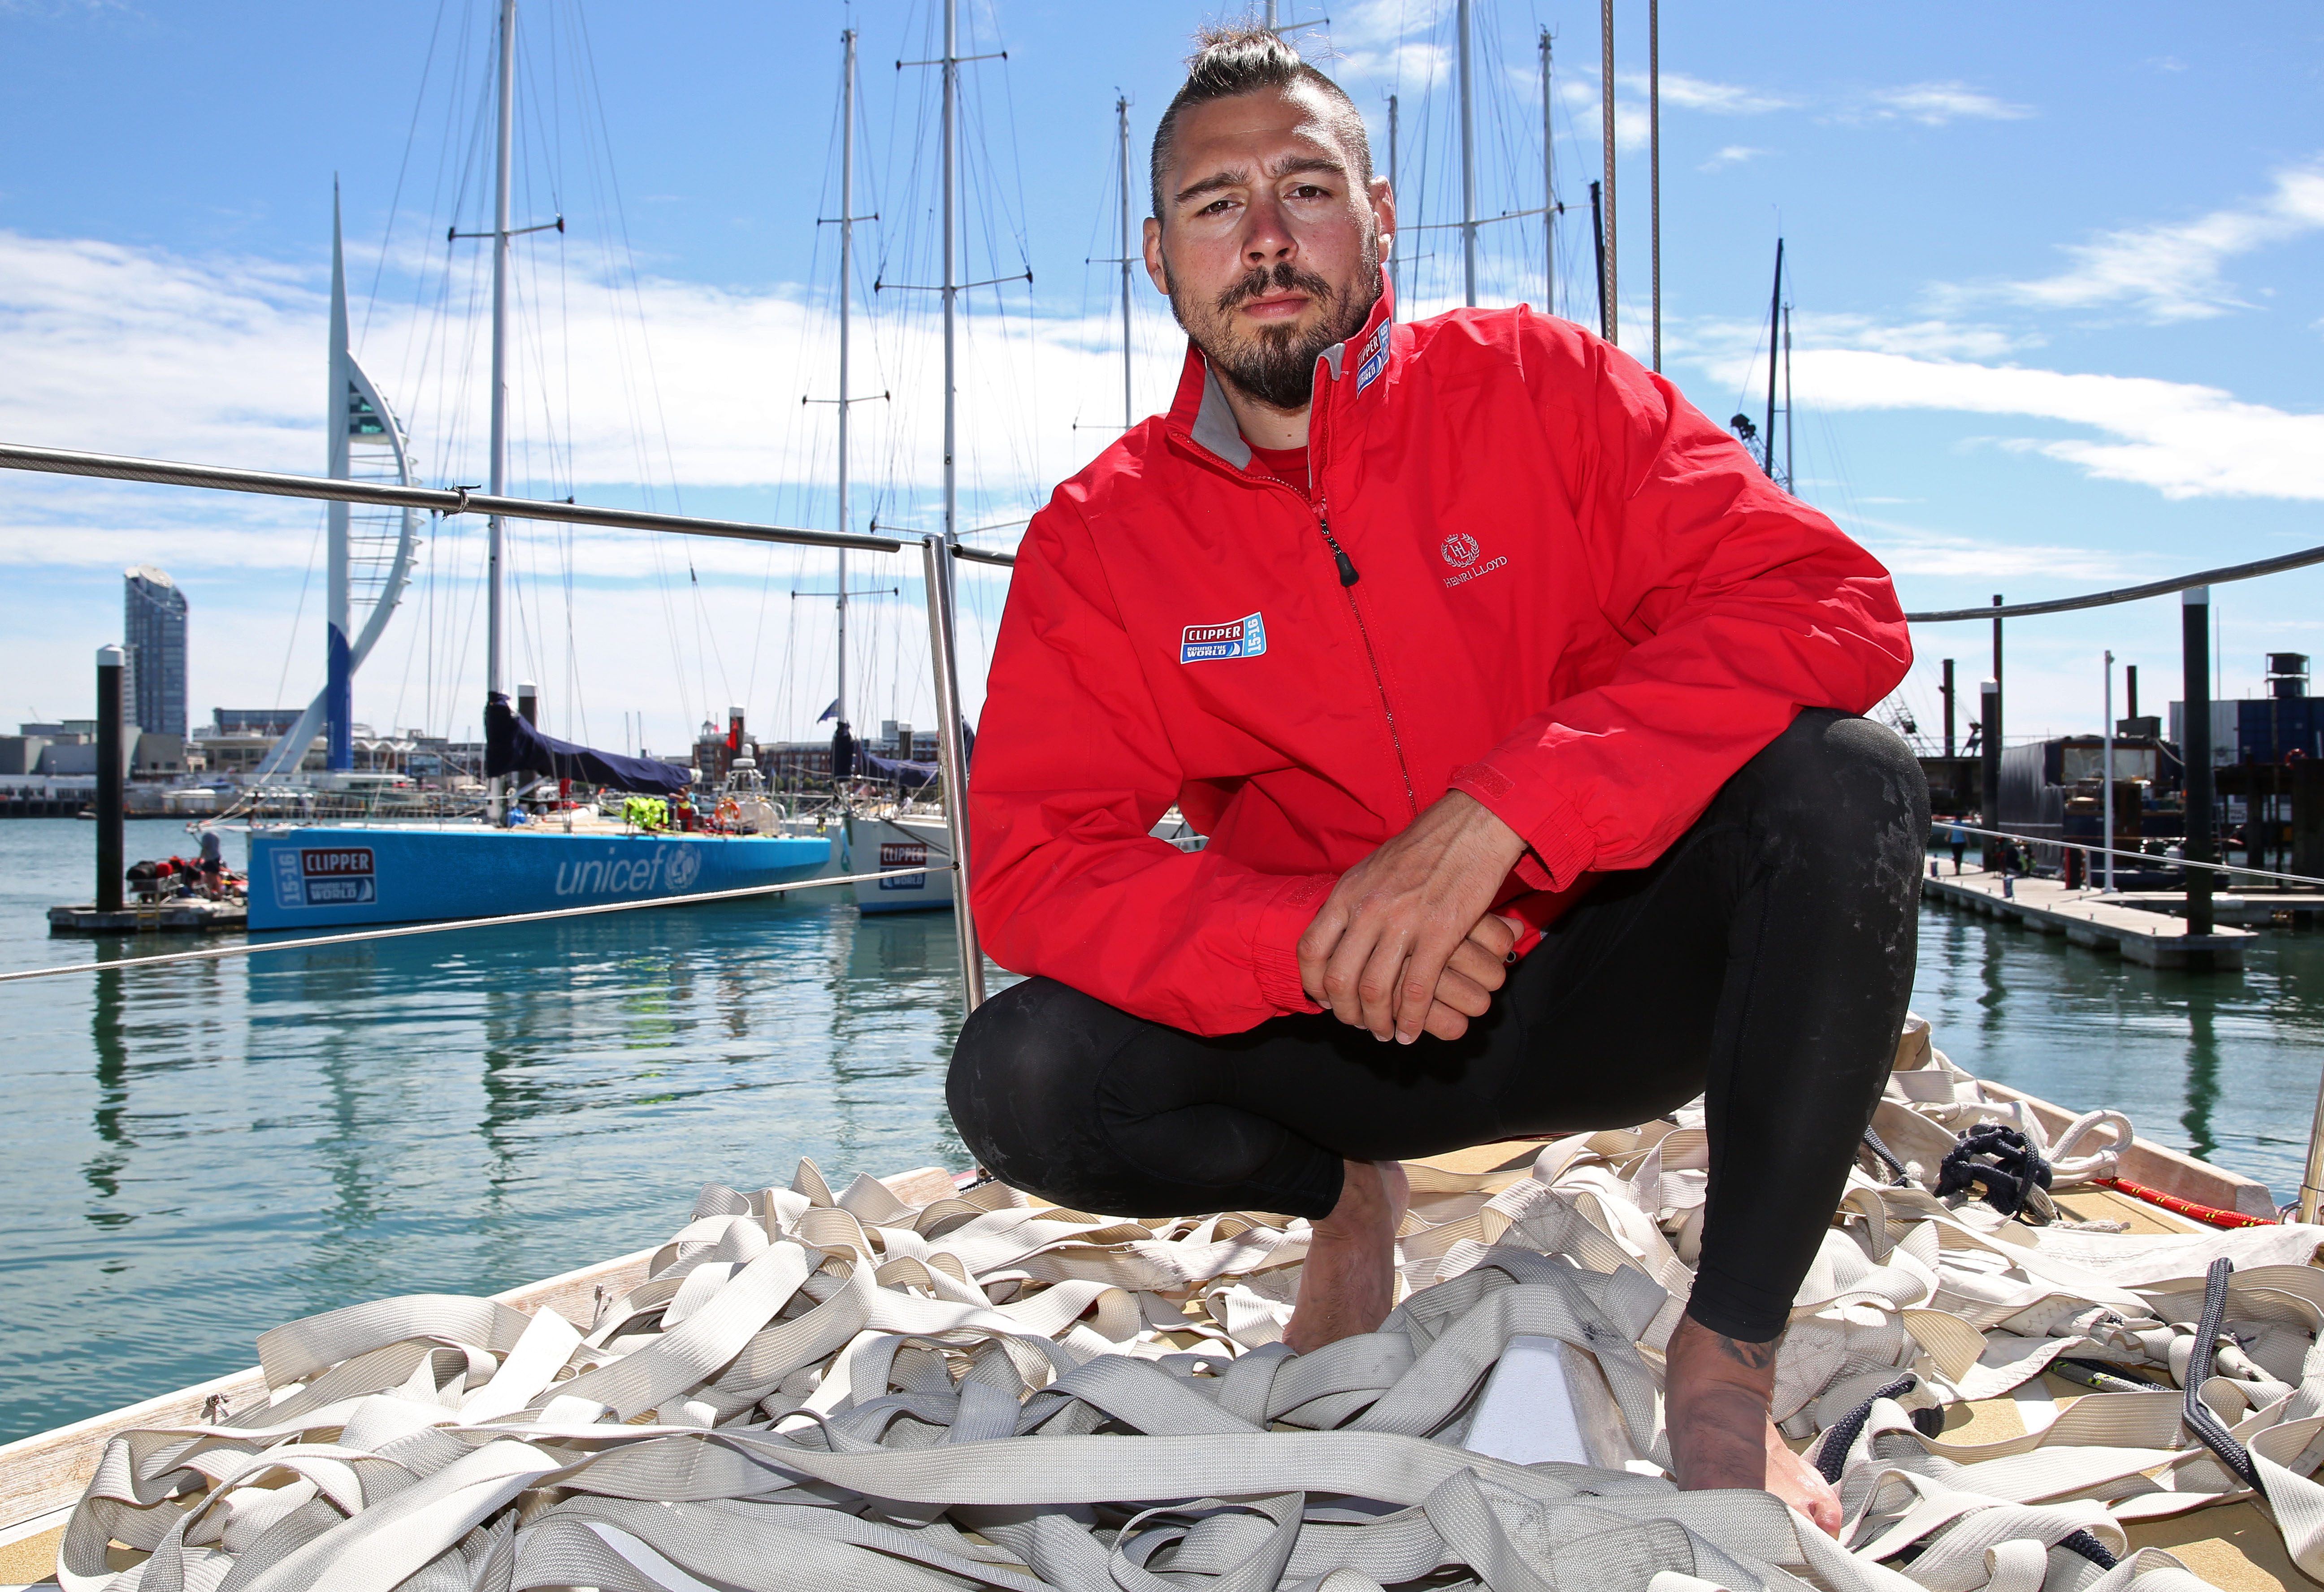 Dan Hardy poses for photographs as part of the Clipper Round the World Race.